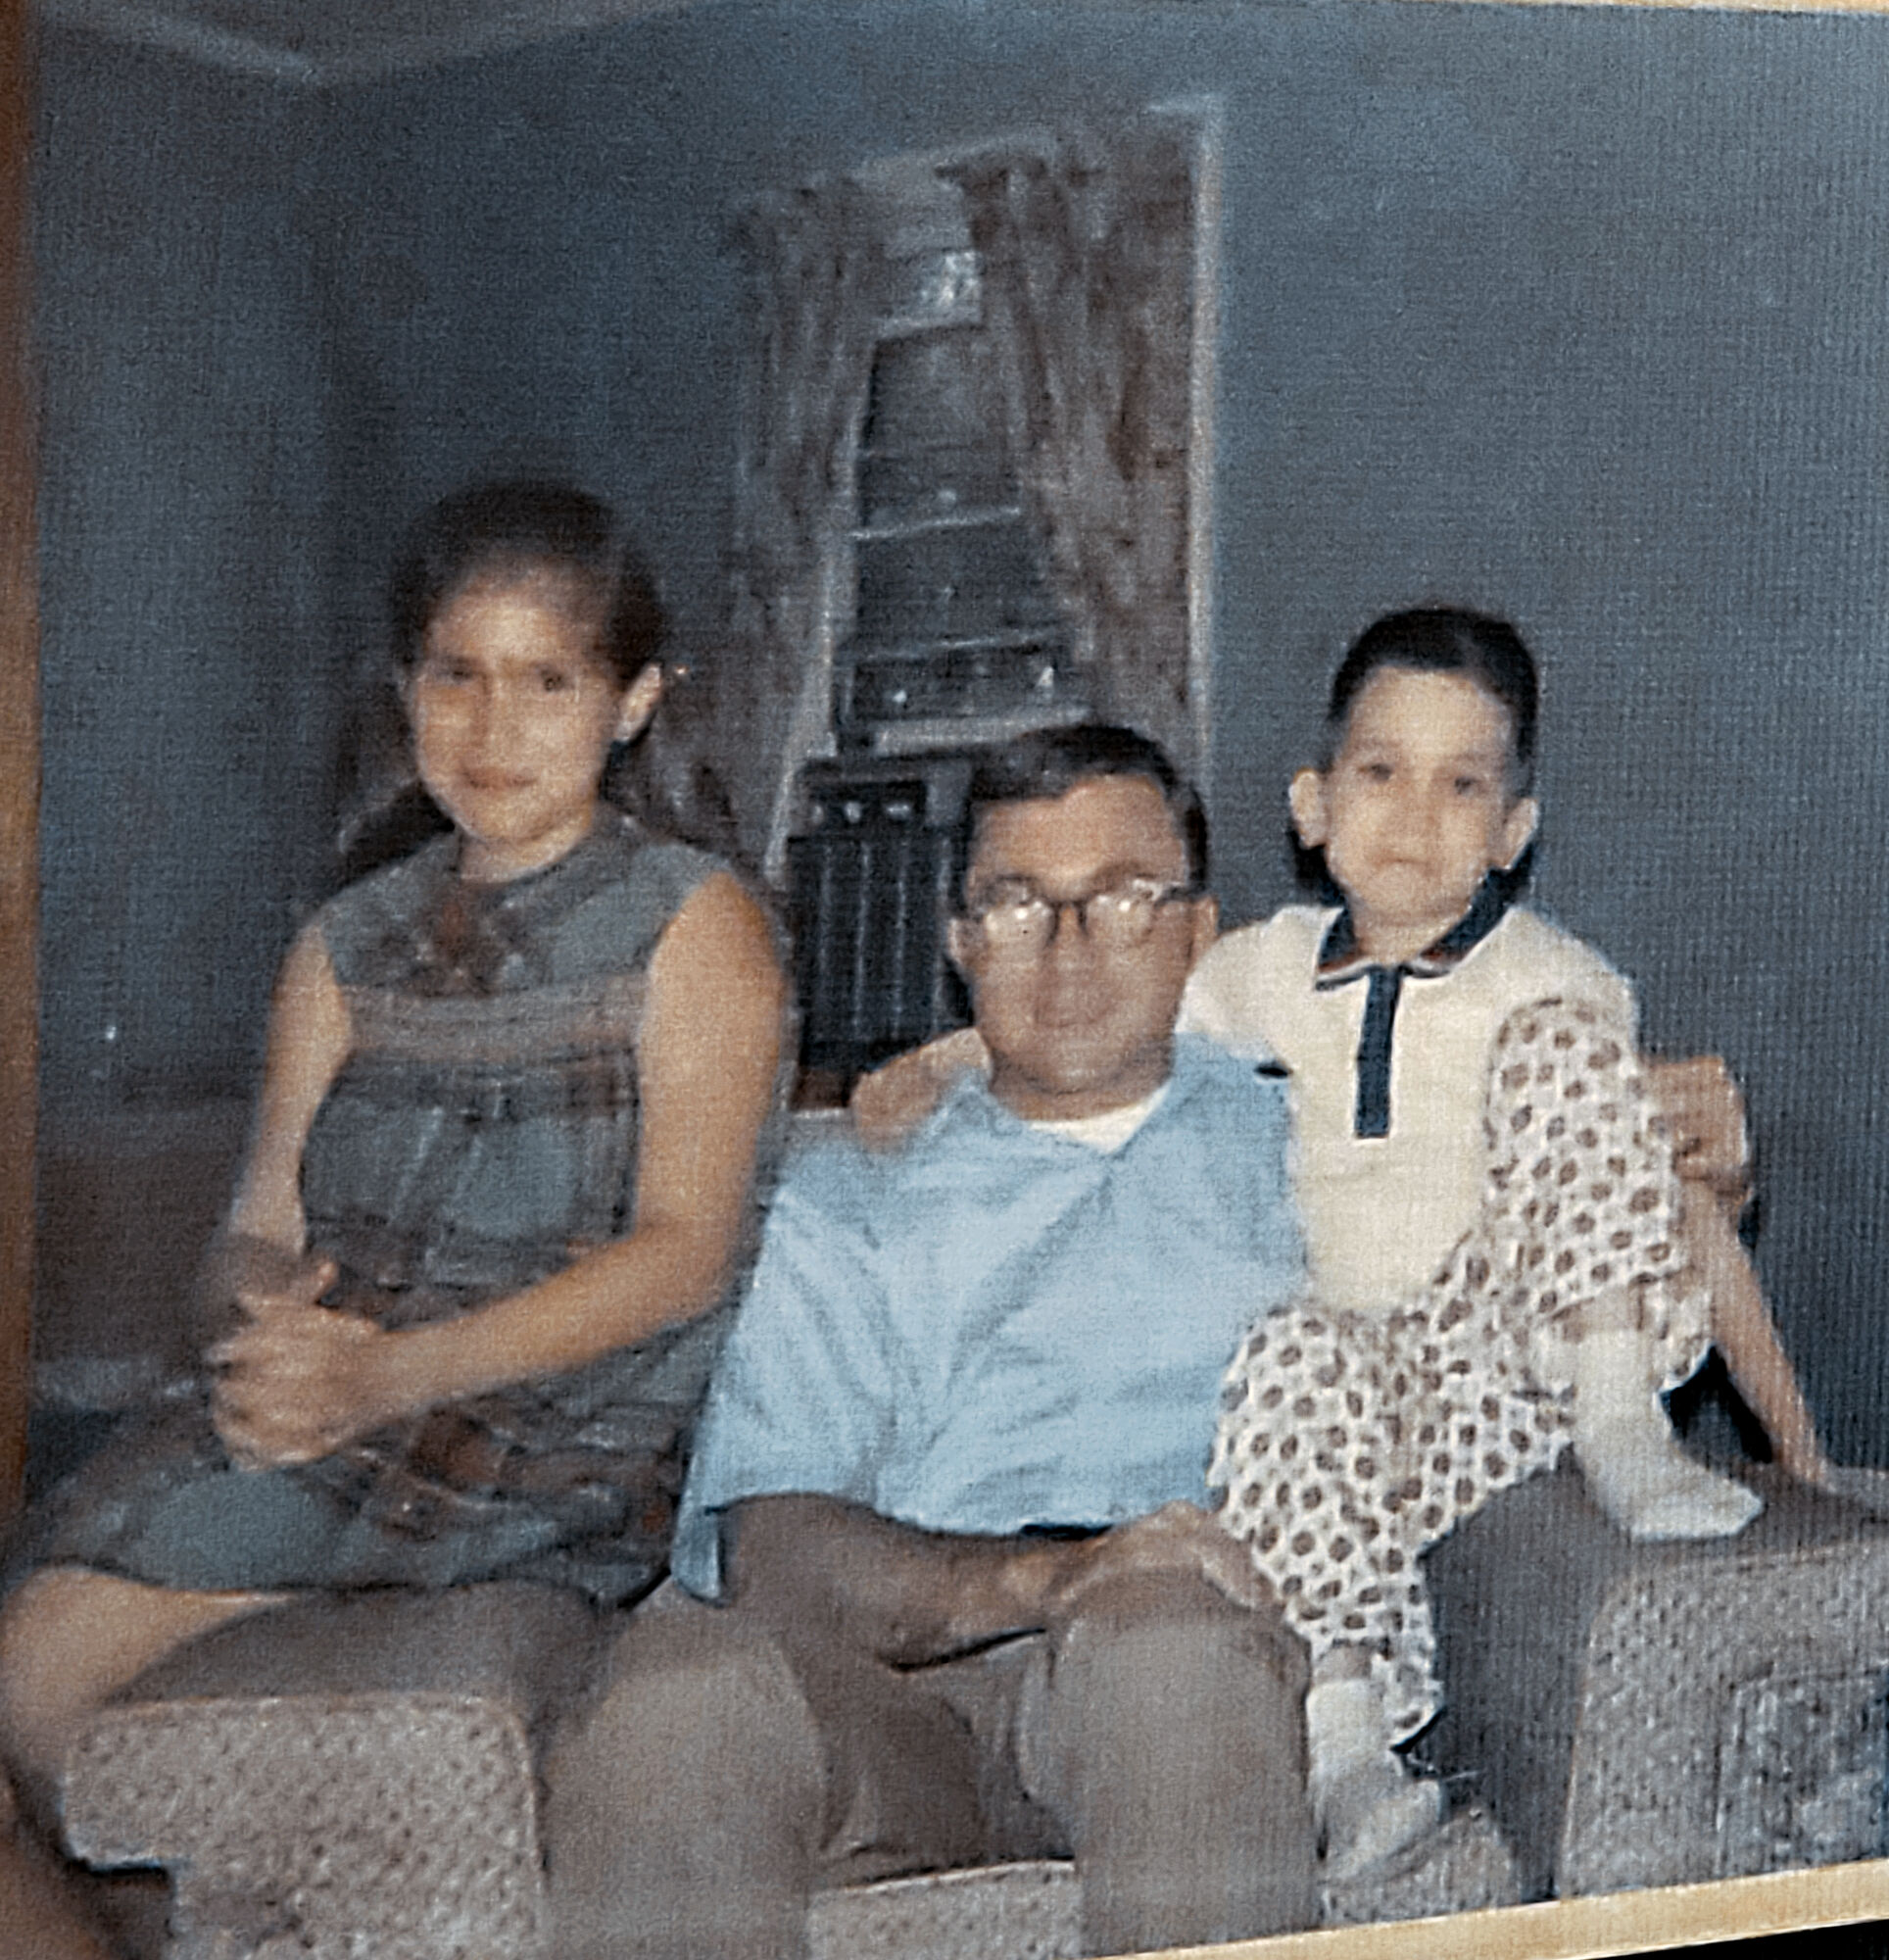 1968 before our uncle left for Vietnam. 